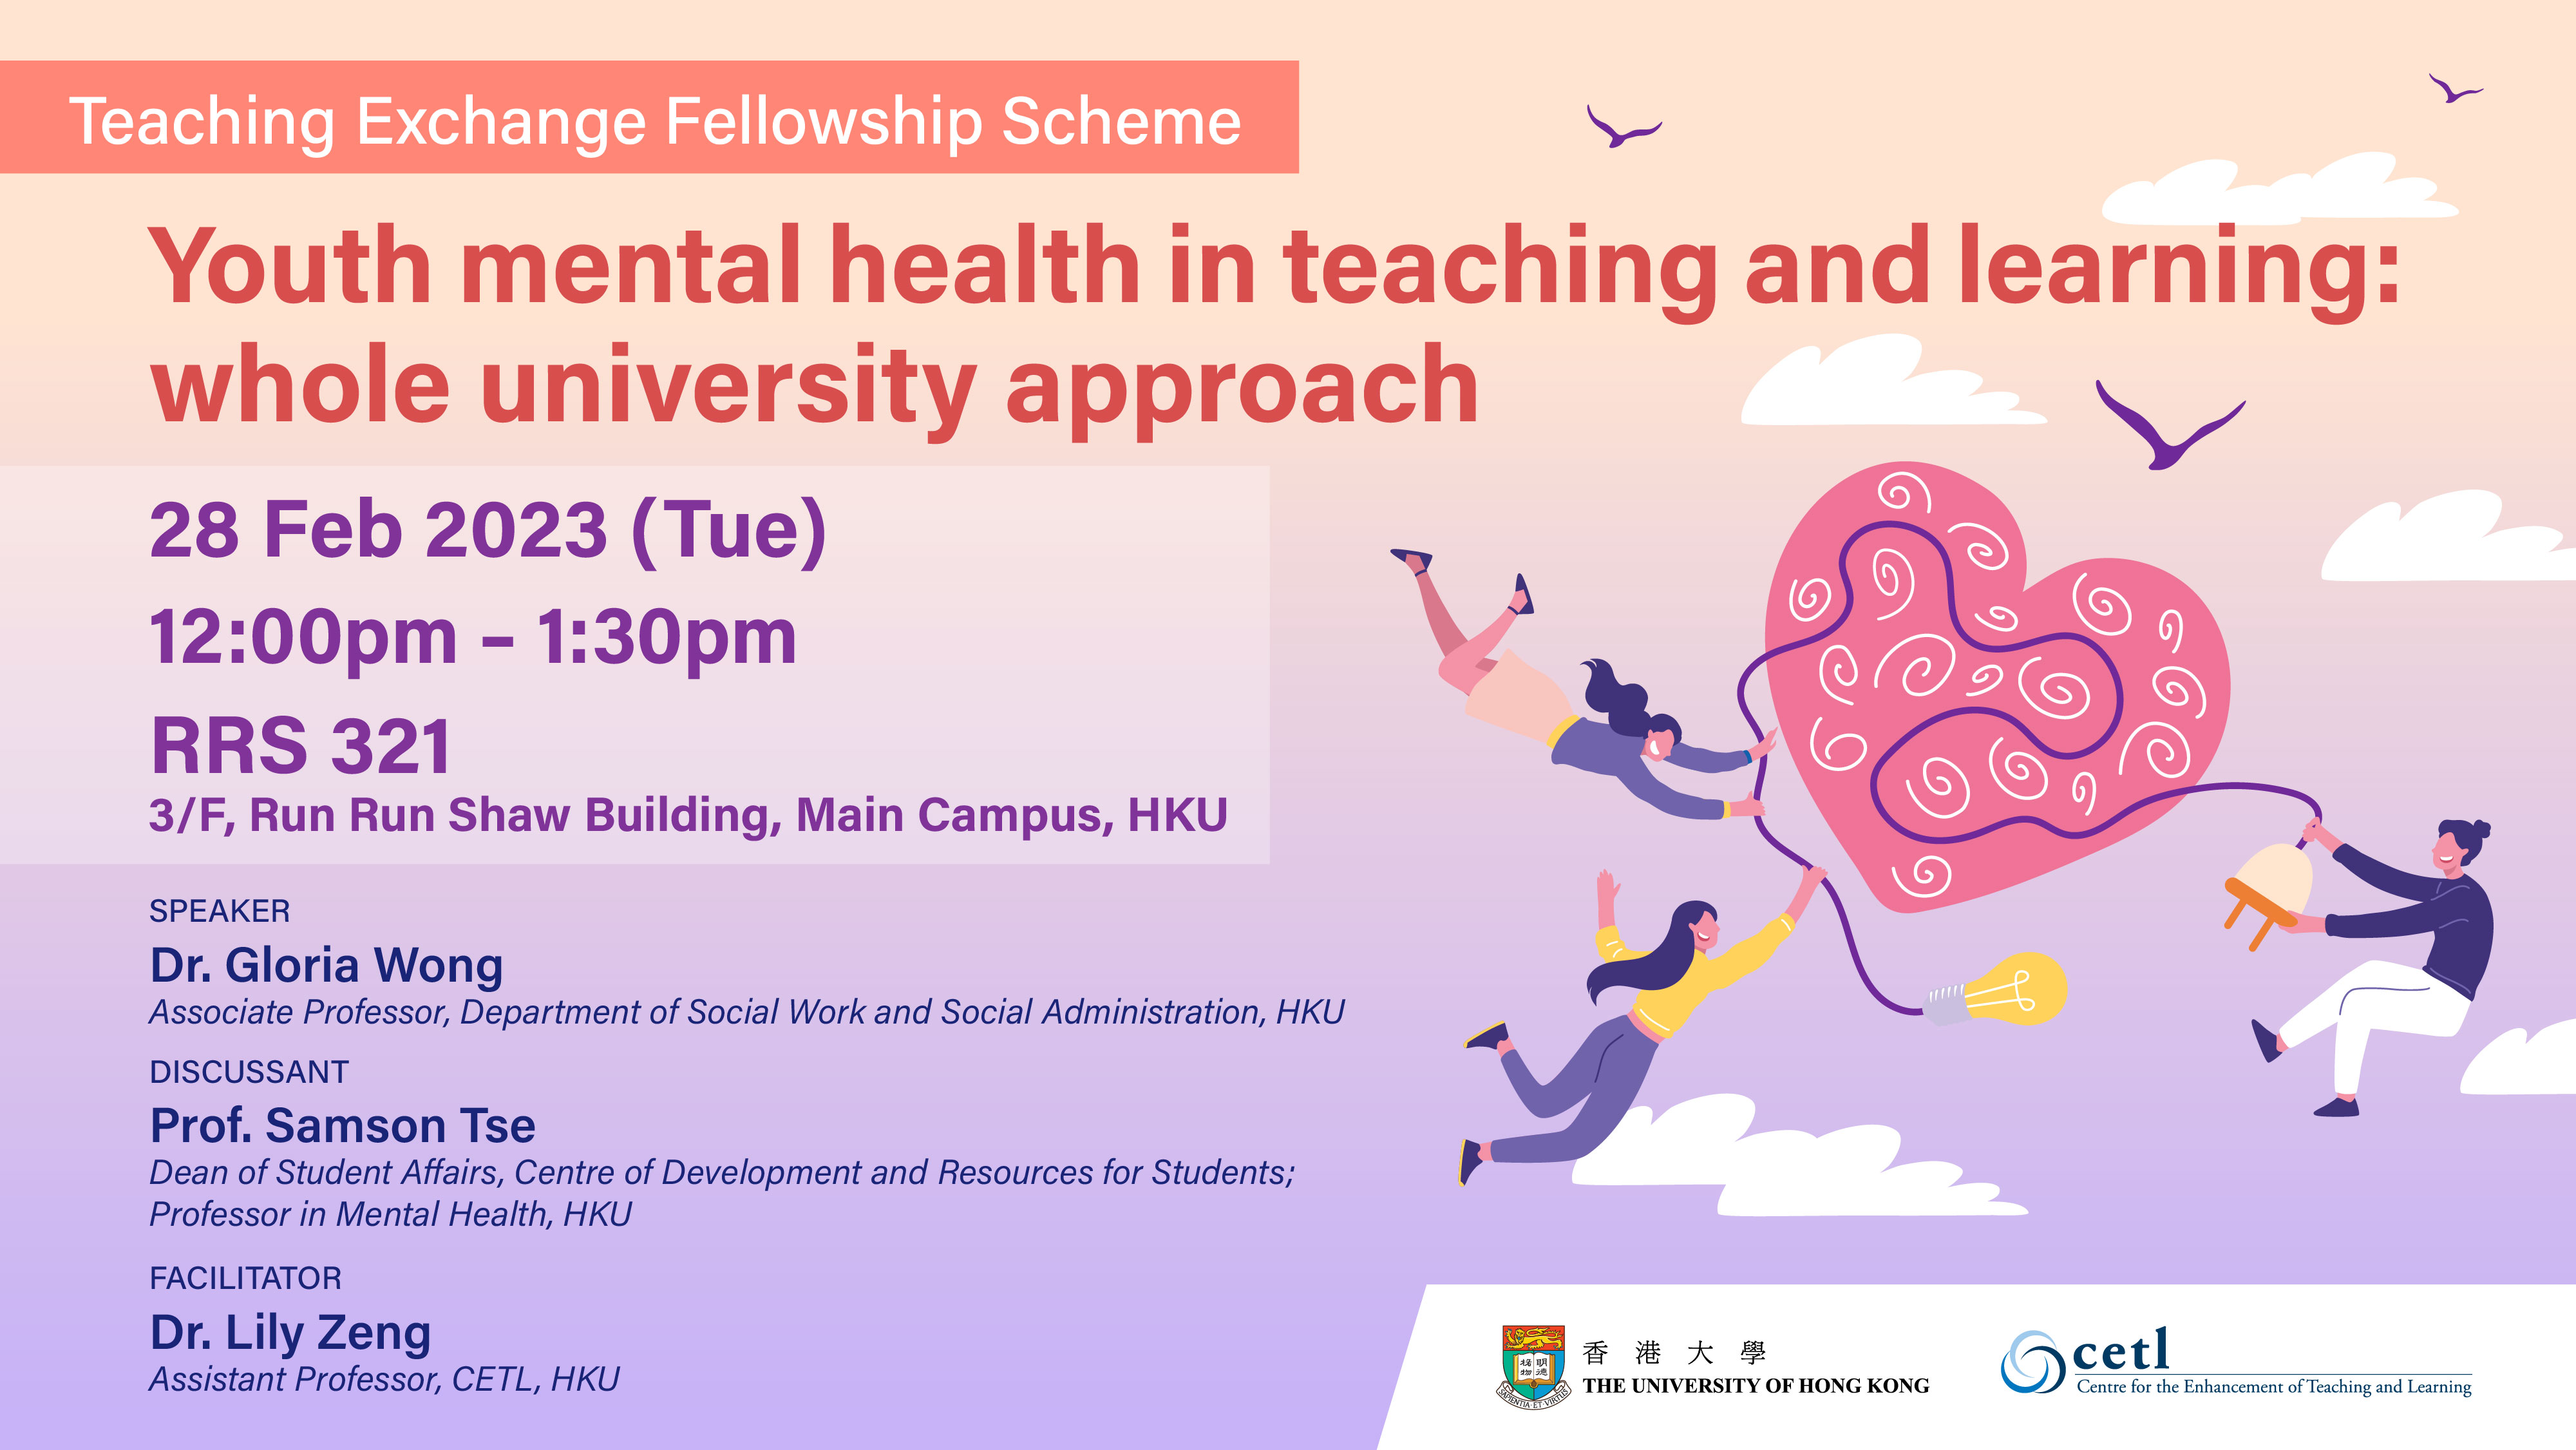 Youth mental health in teaching and learning: whole university approach